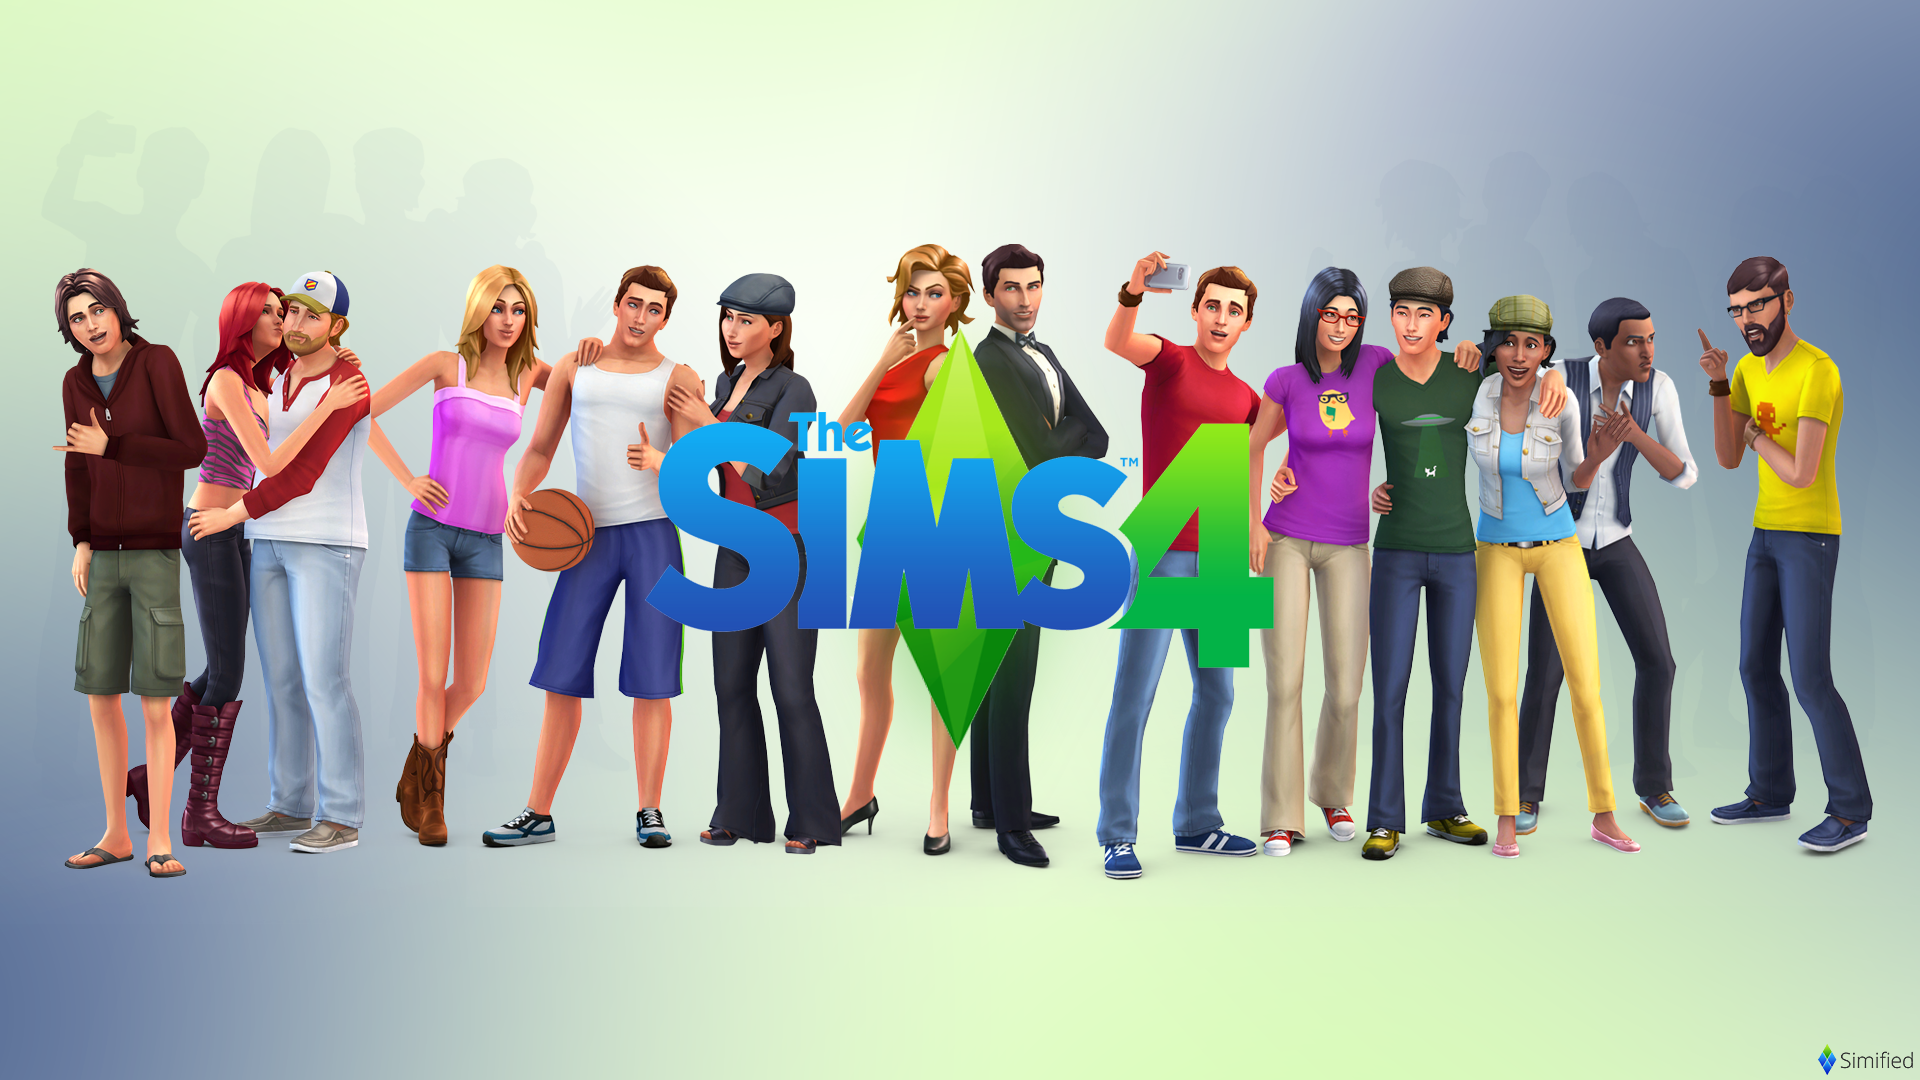 The Sims Games Background For Wallpaper Cool